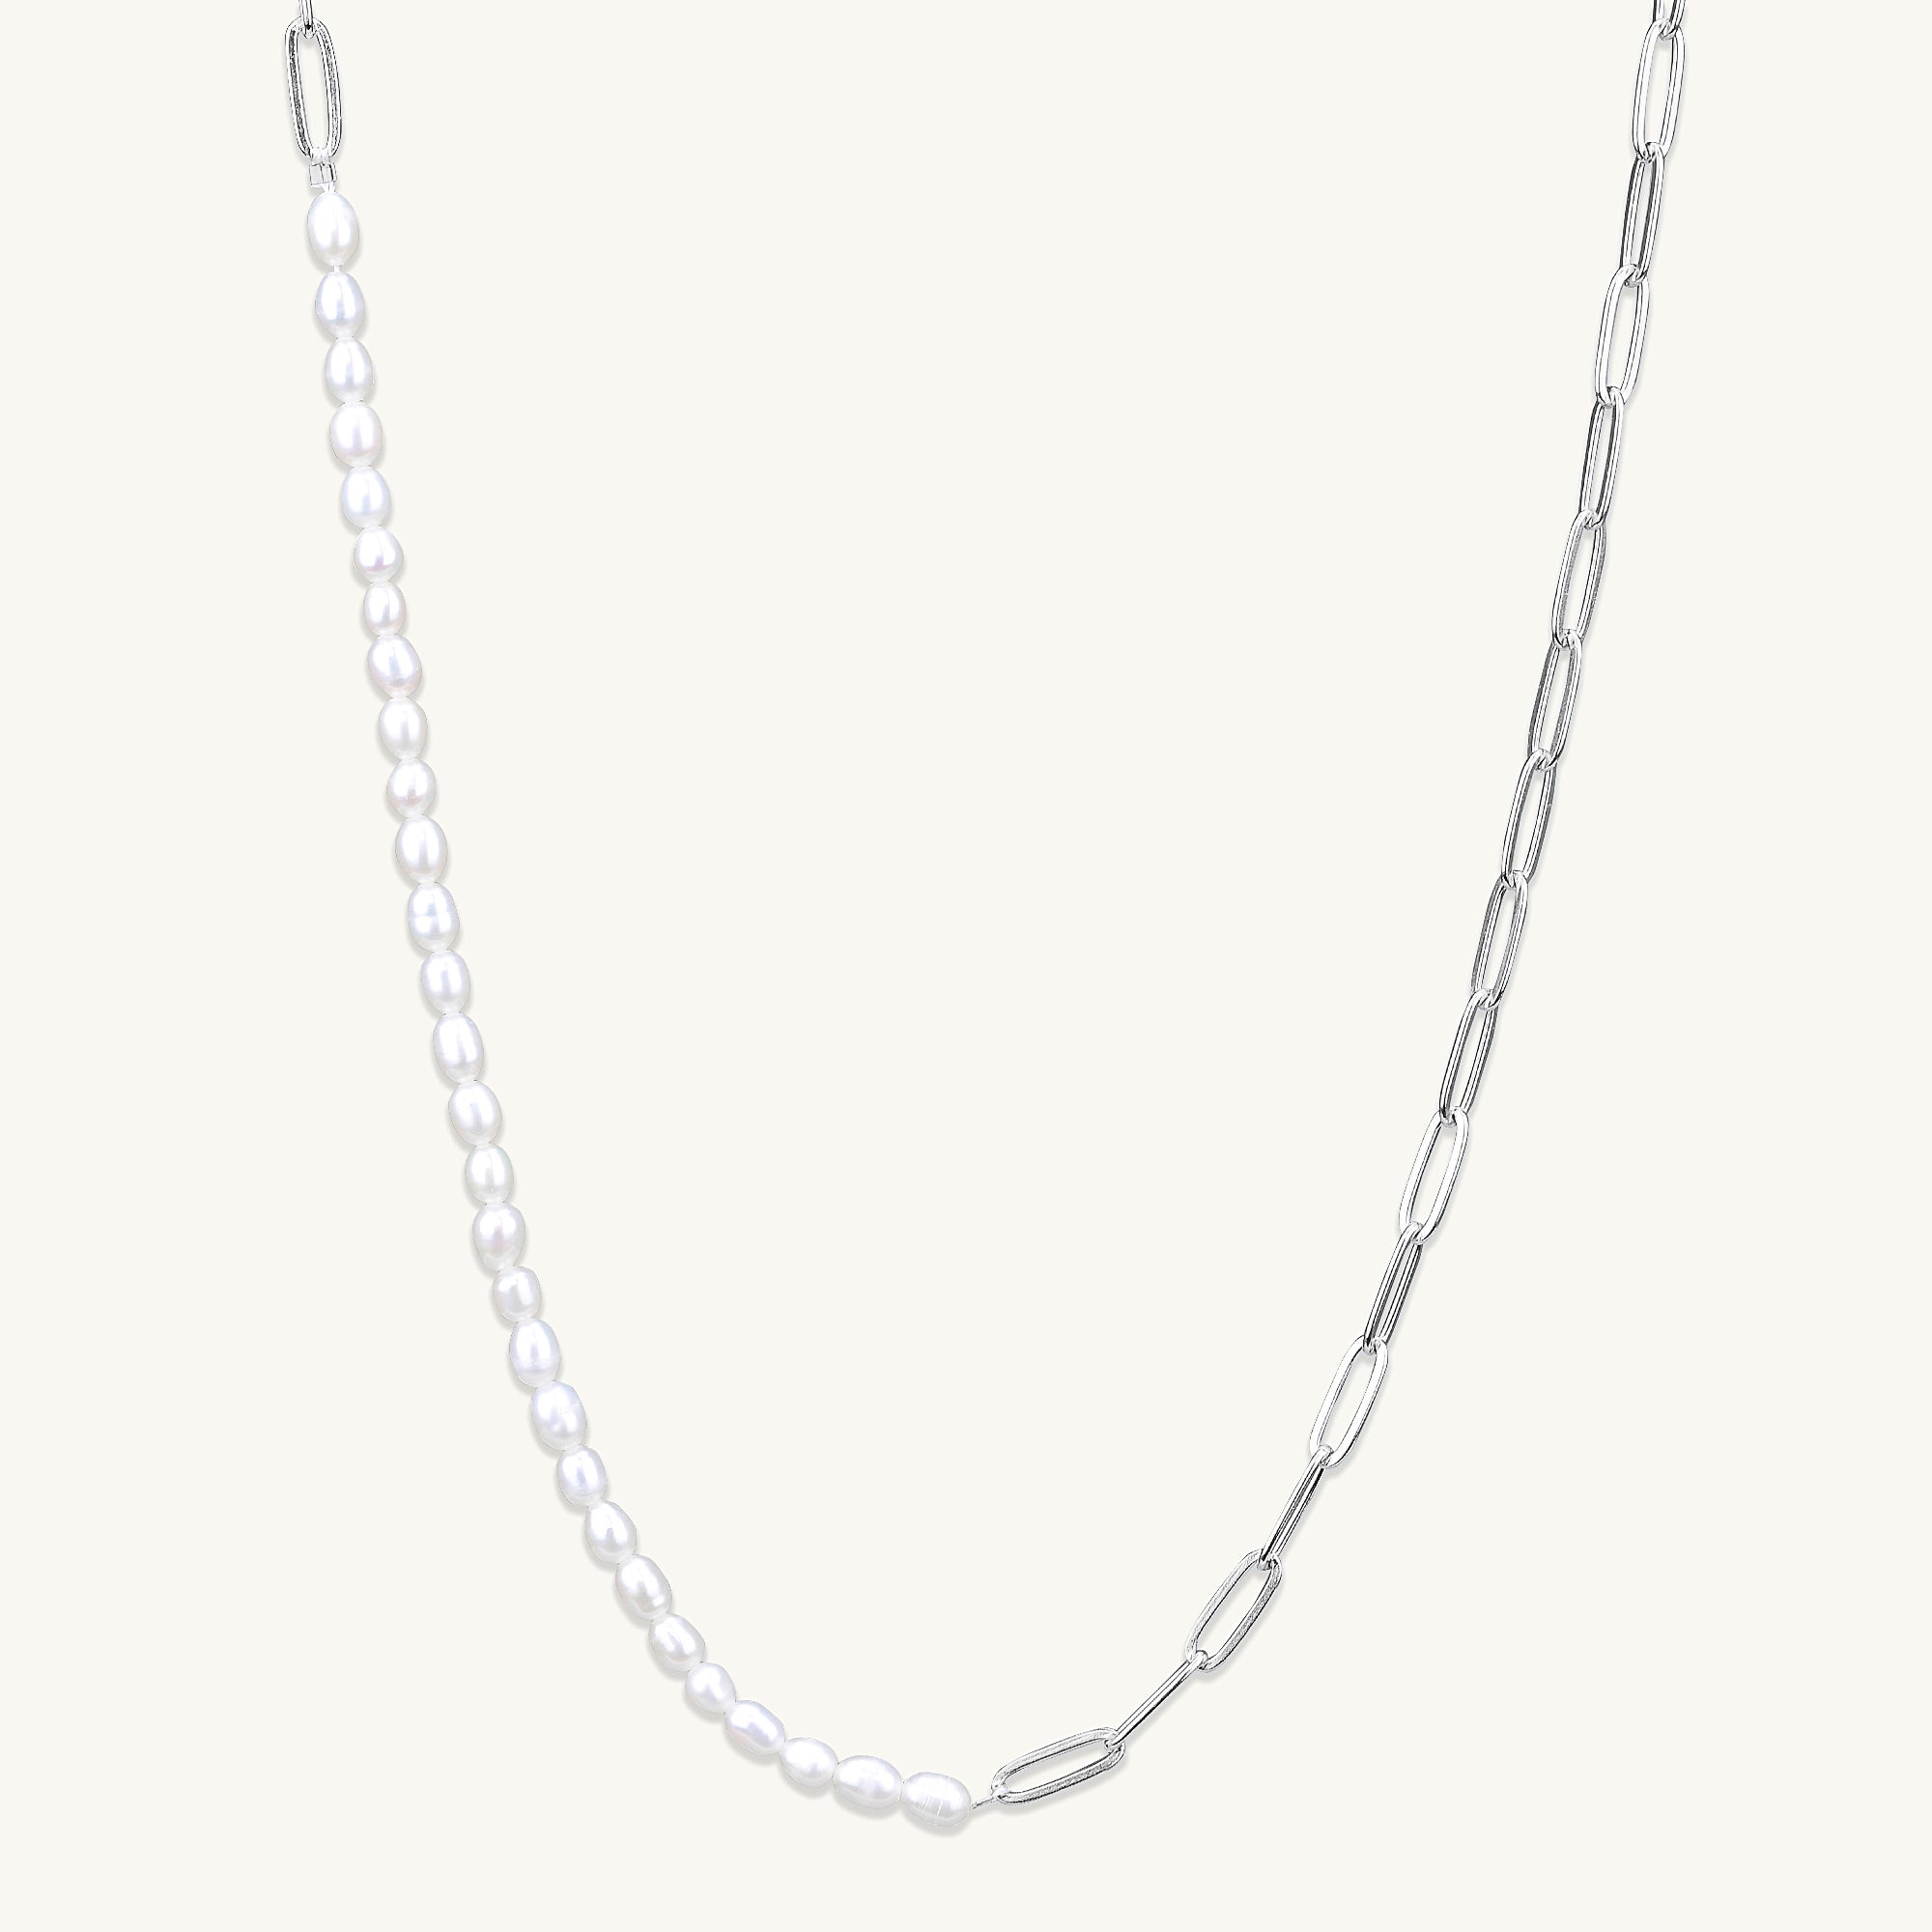 Kelly Paperlink Pearl Necklace